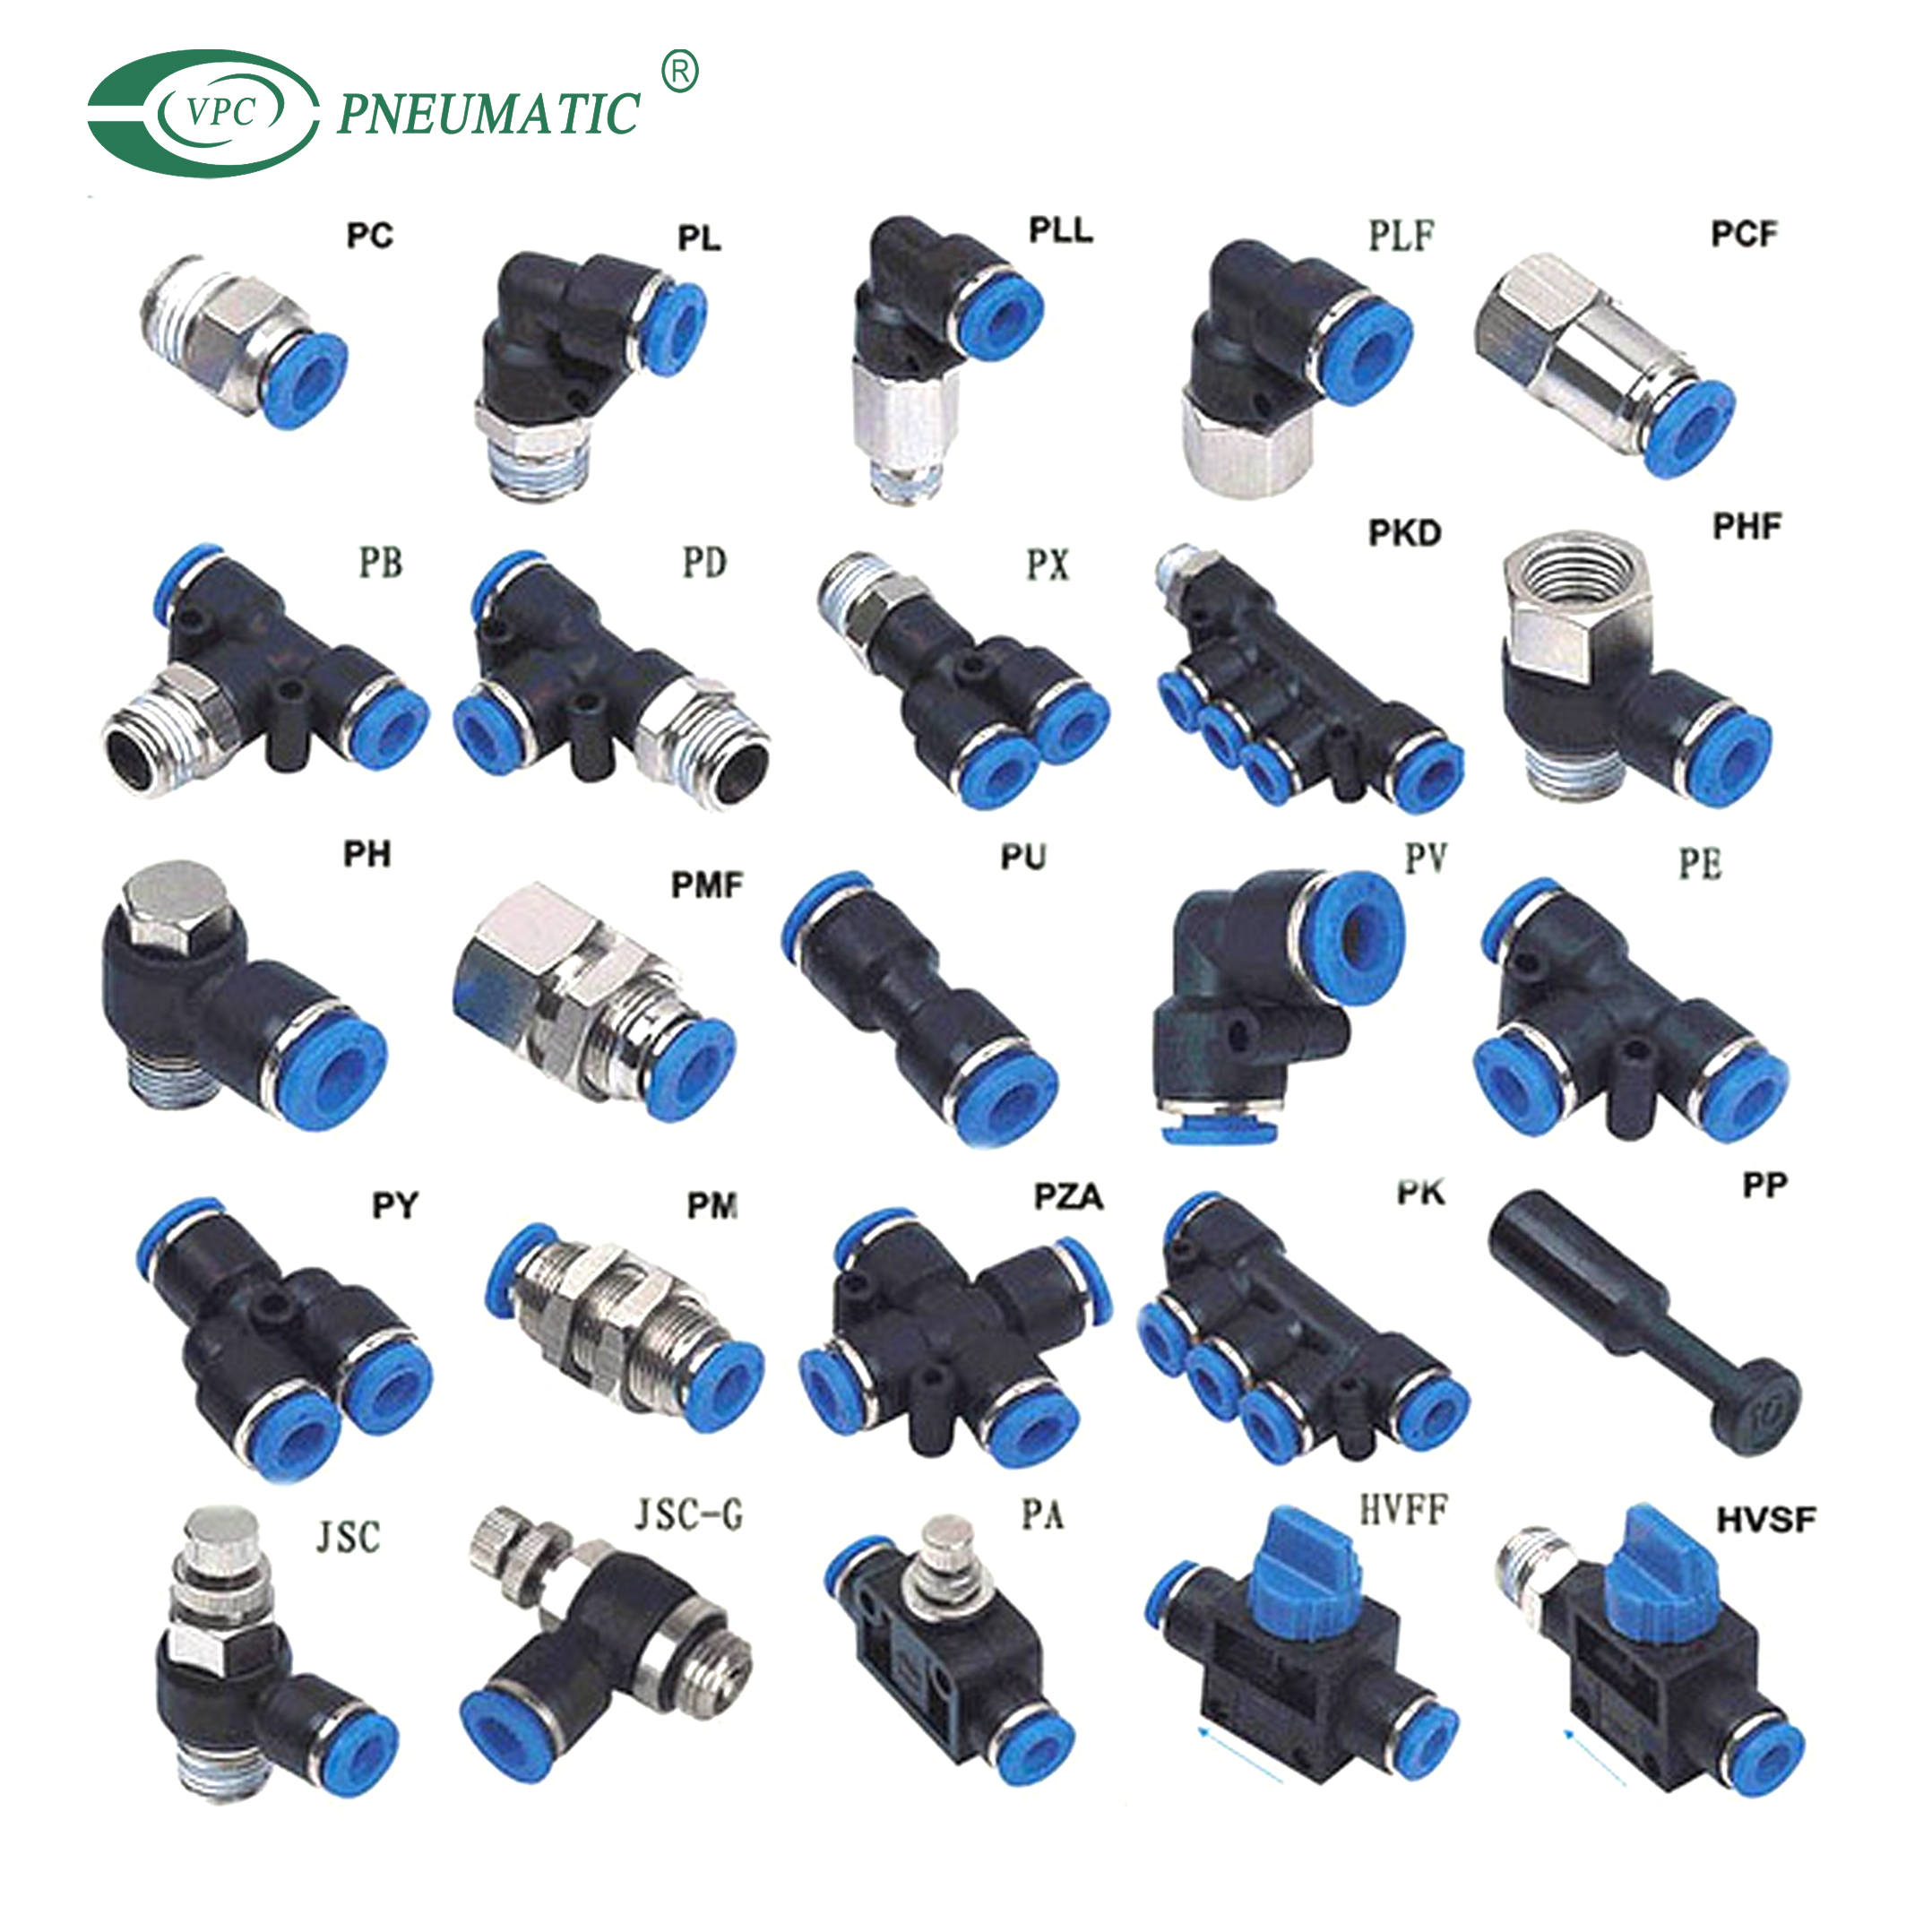 Mini Air Connectors One Touch Push Lock Male Straight Coupling Connect Pu Pipe Pneumatic Fittings